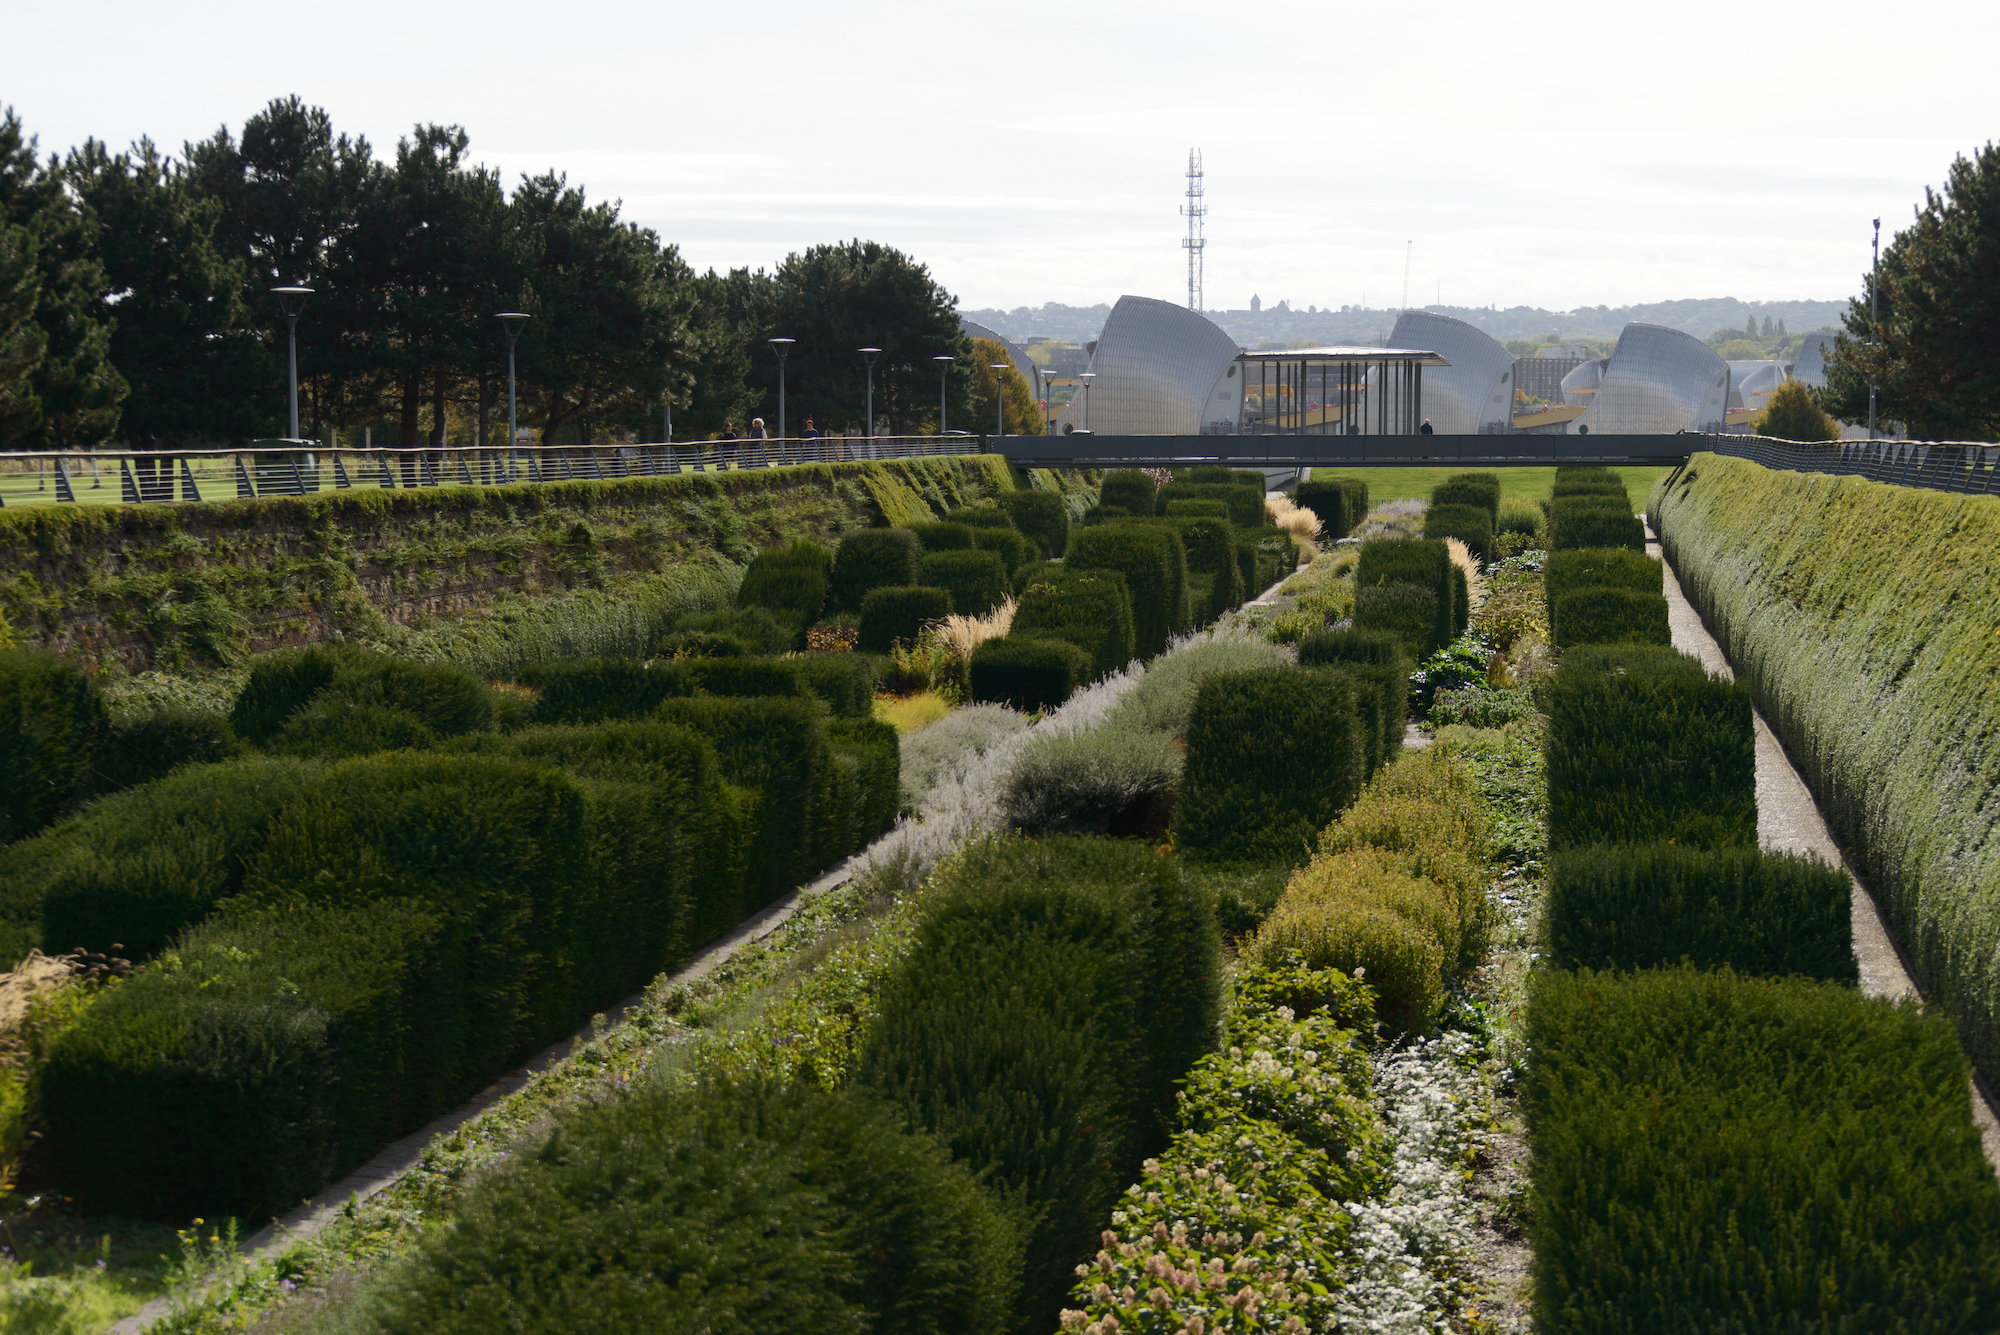 rolling hedges of thames barrier park with a view to the thames barrier structures in the background